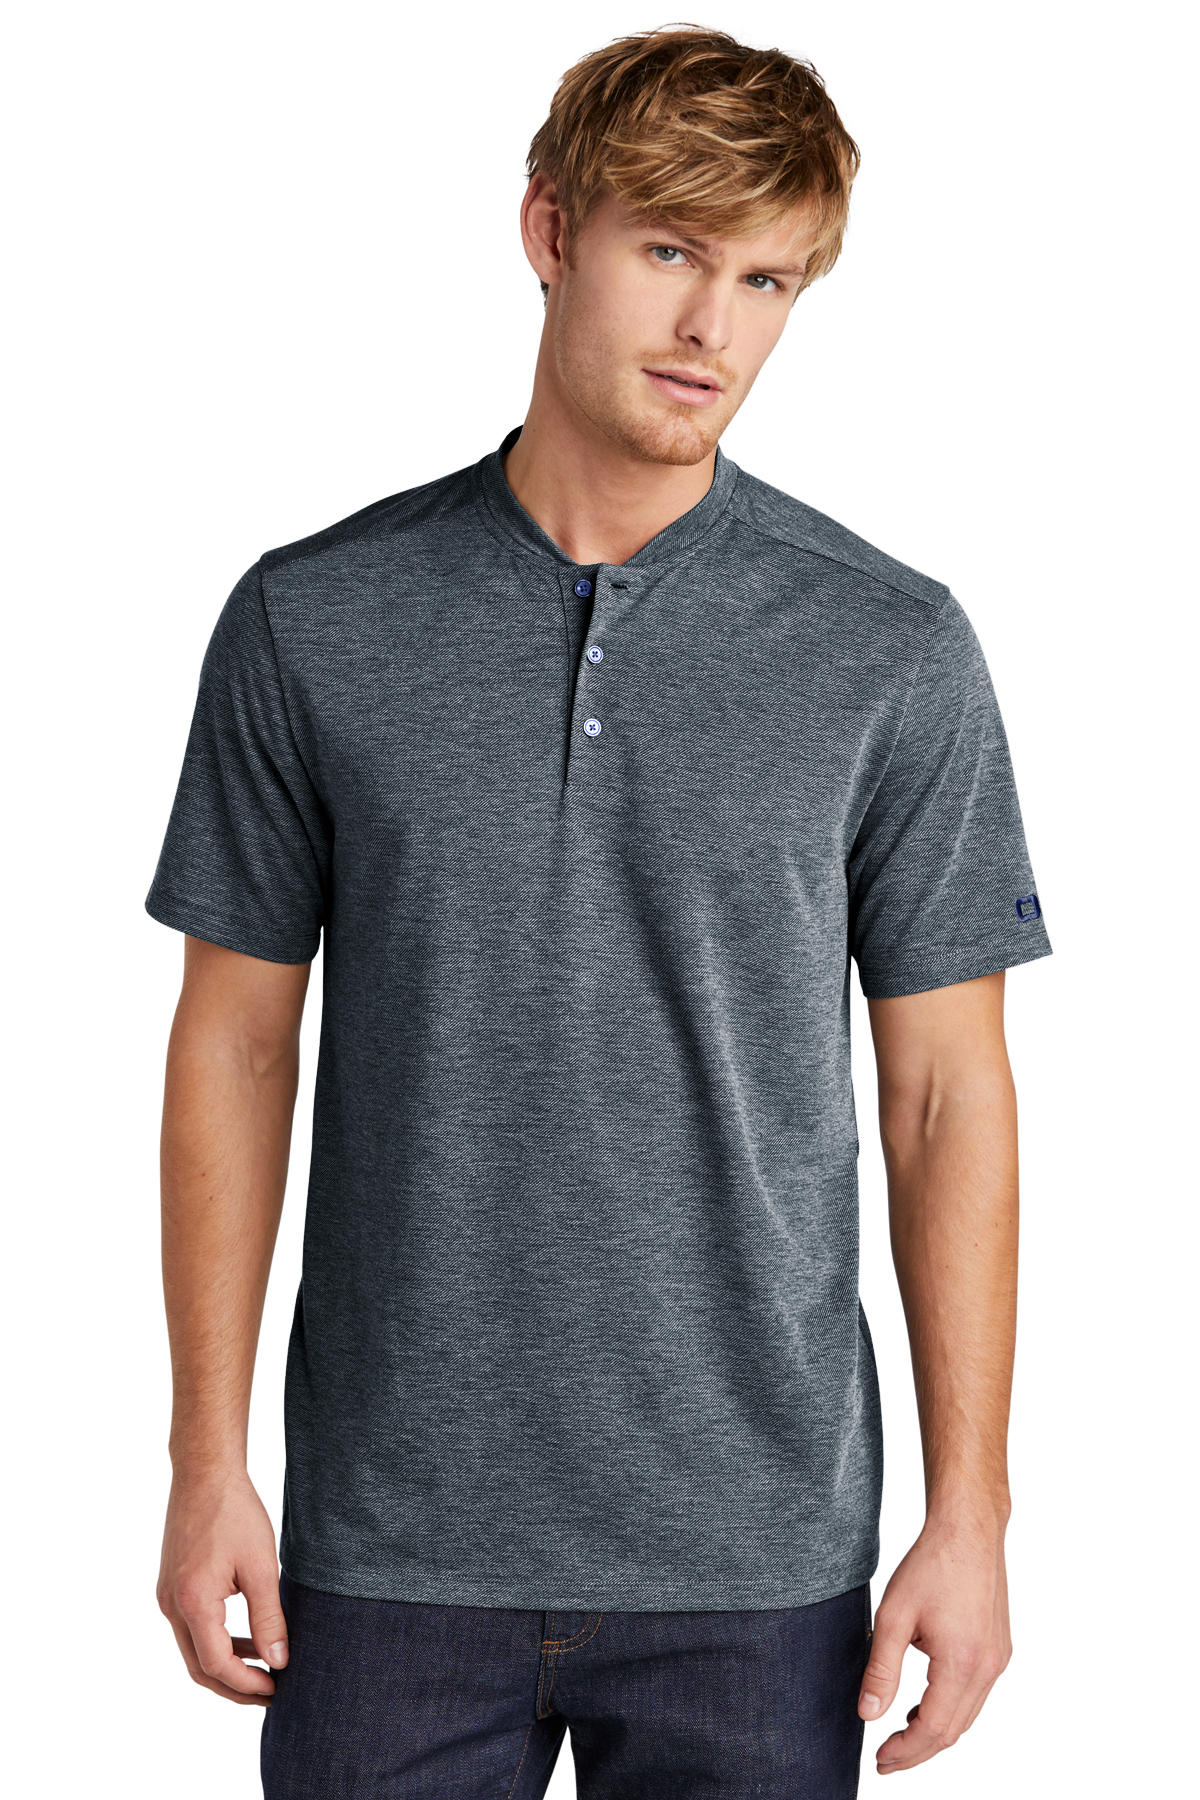 OGIO Evolution Henley | Product | Company Casuals